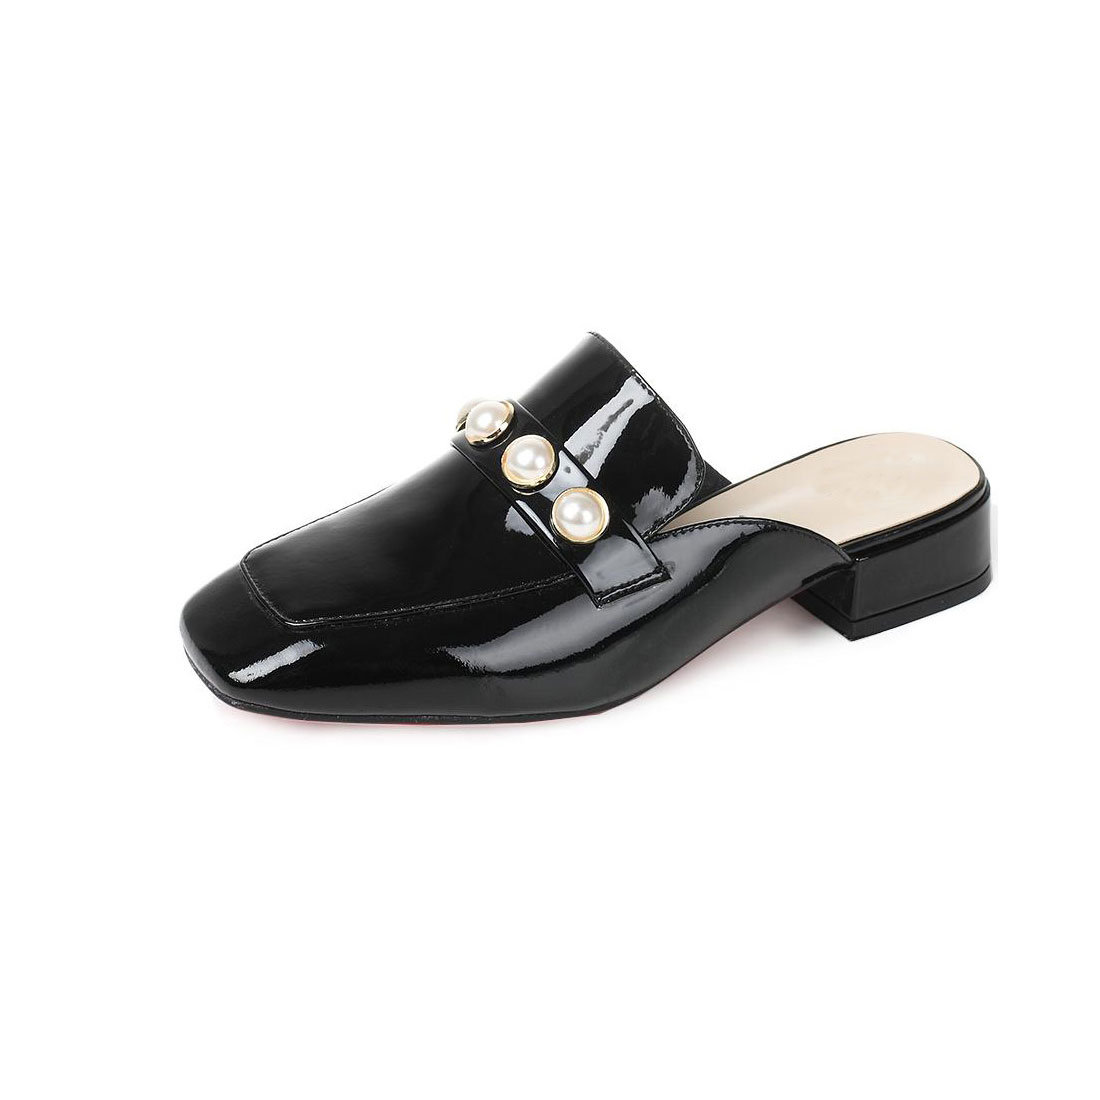 Patent leather upper with pearl lady slipper women casual flat shoes YH1169